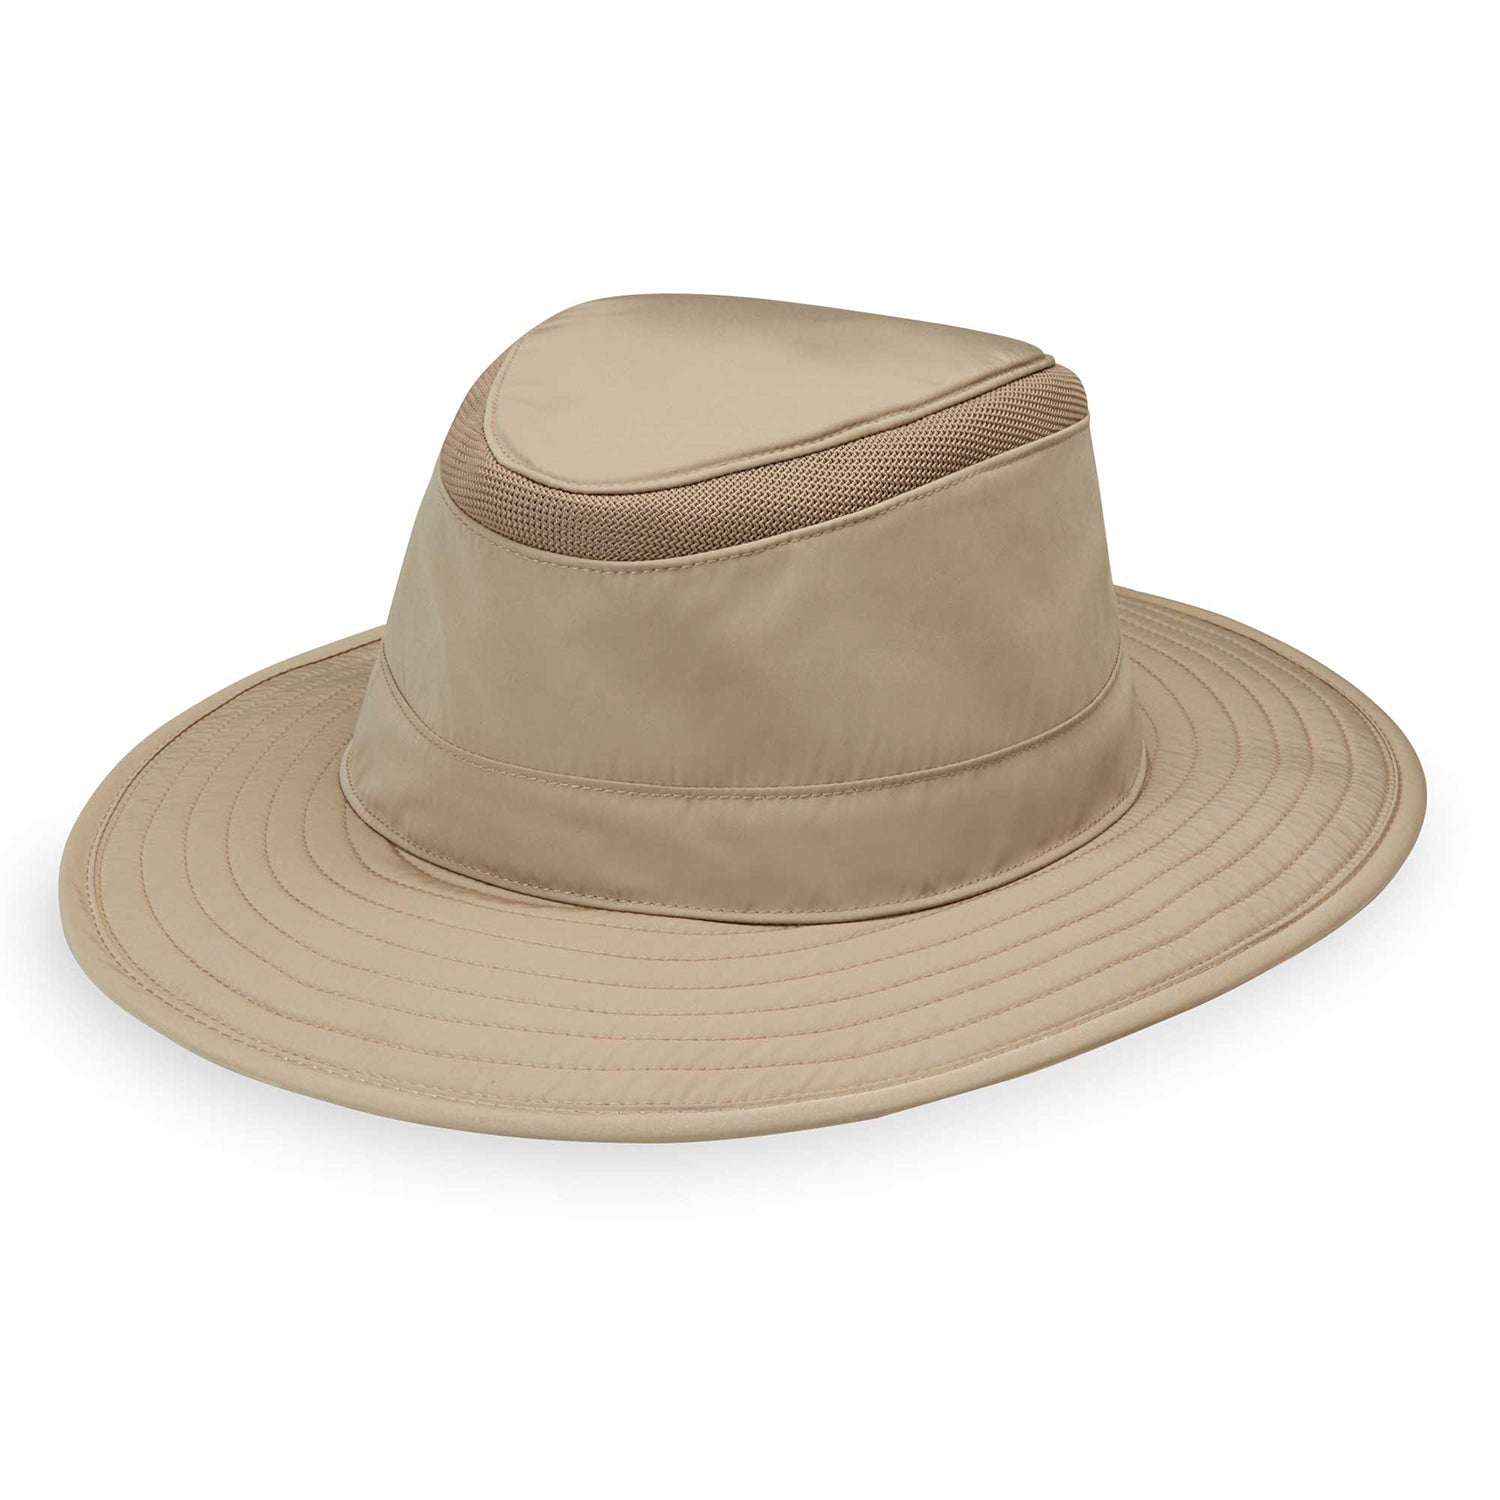 Featuring Summit Waterproof sun hat by Wallaroo, with UPF 50+ rating and packable material